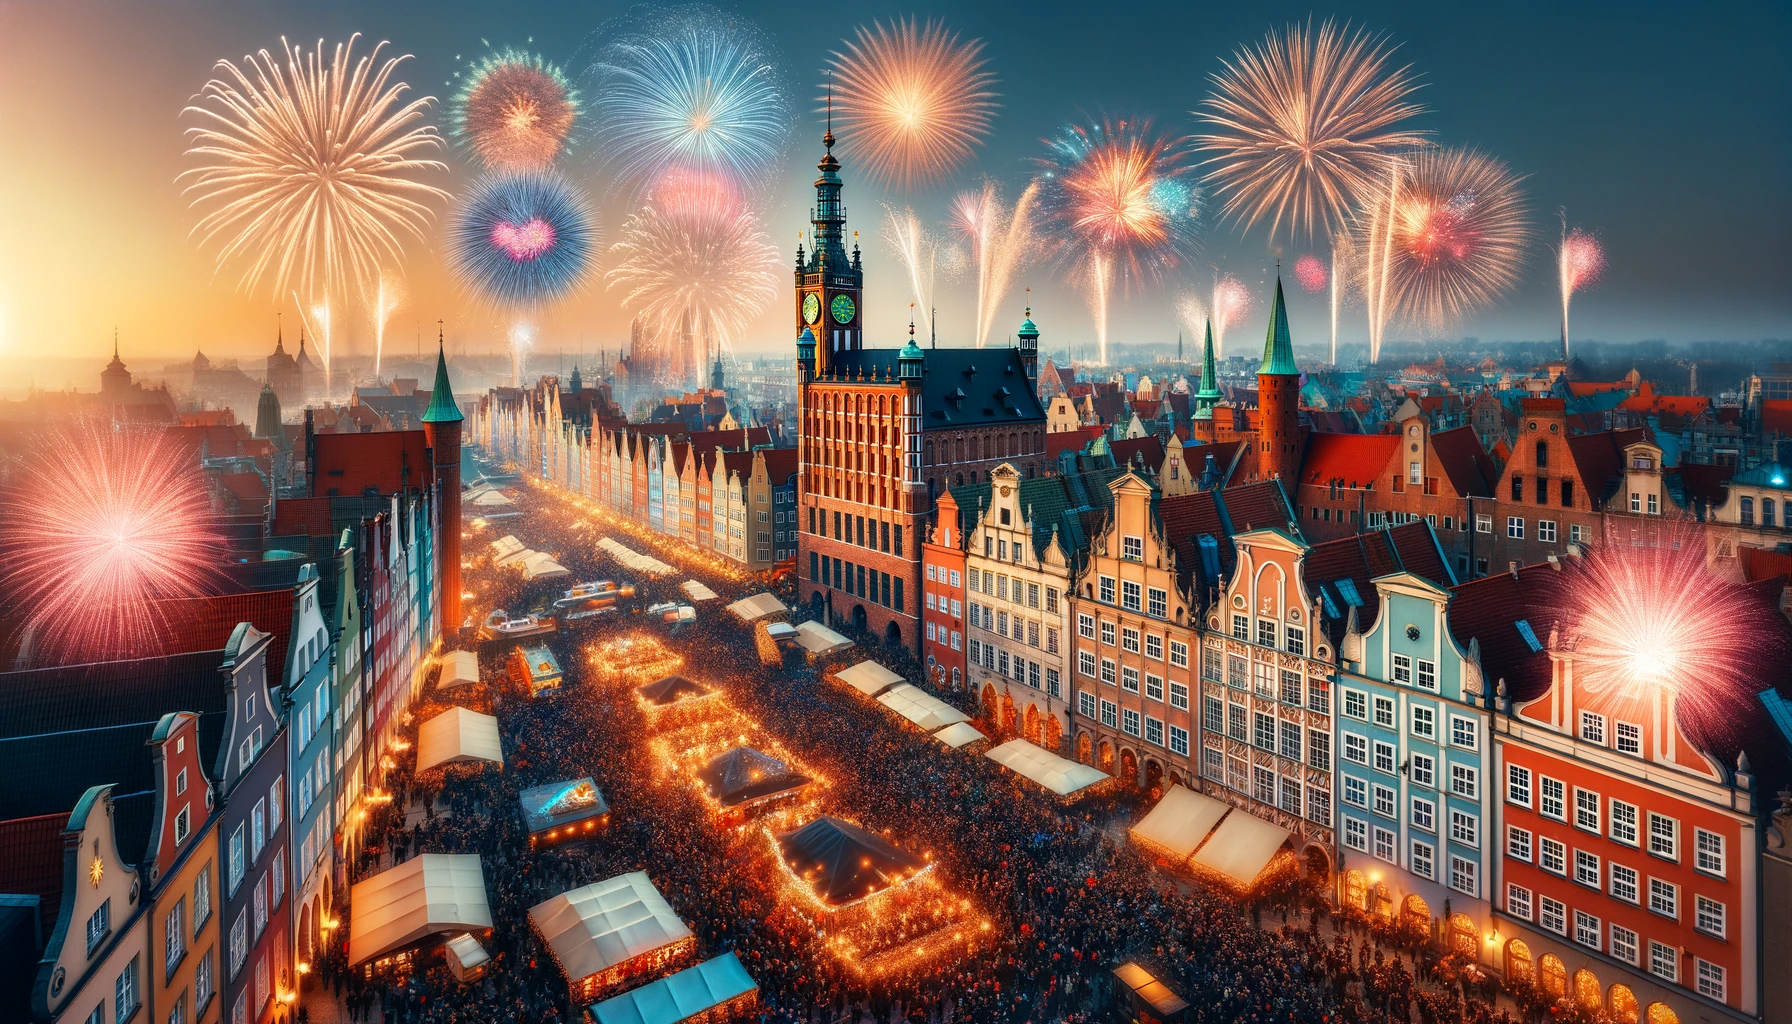 Spectacular New Year's Eve Fireworks at Long Market in Gdansk